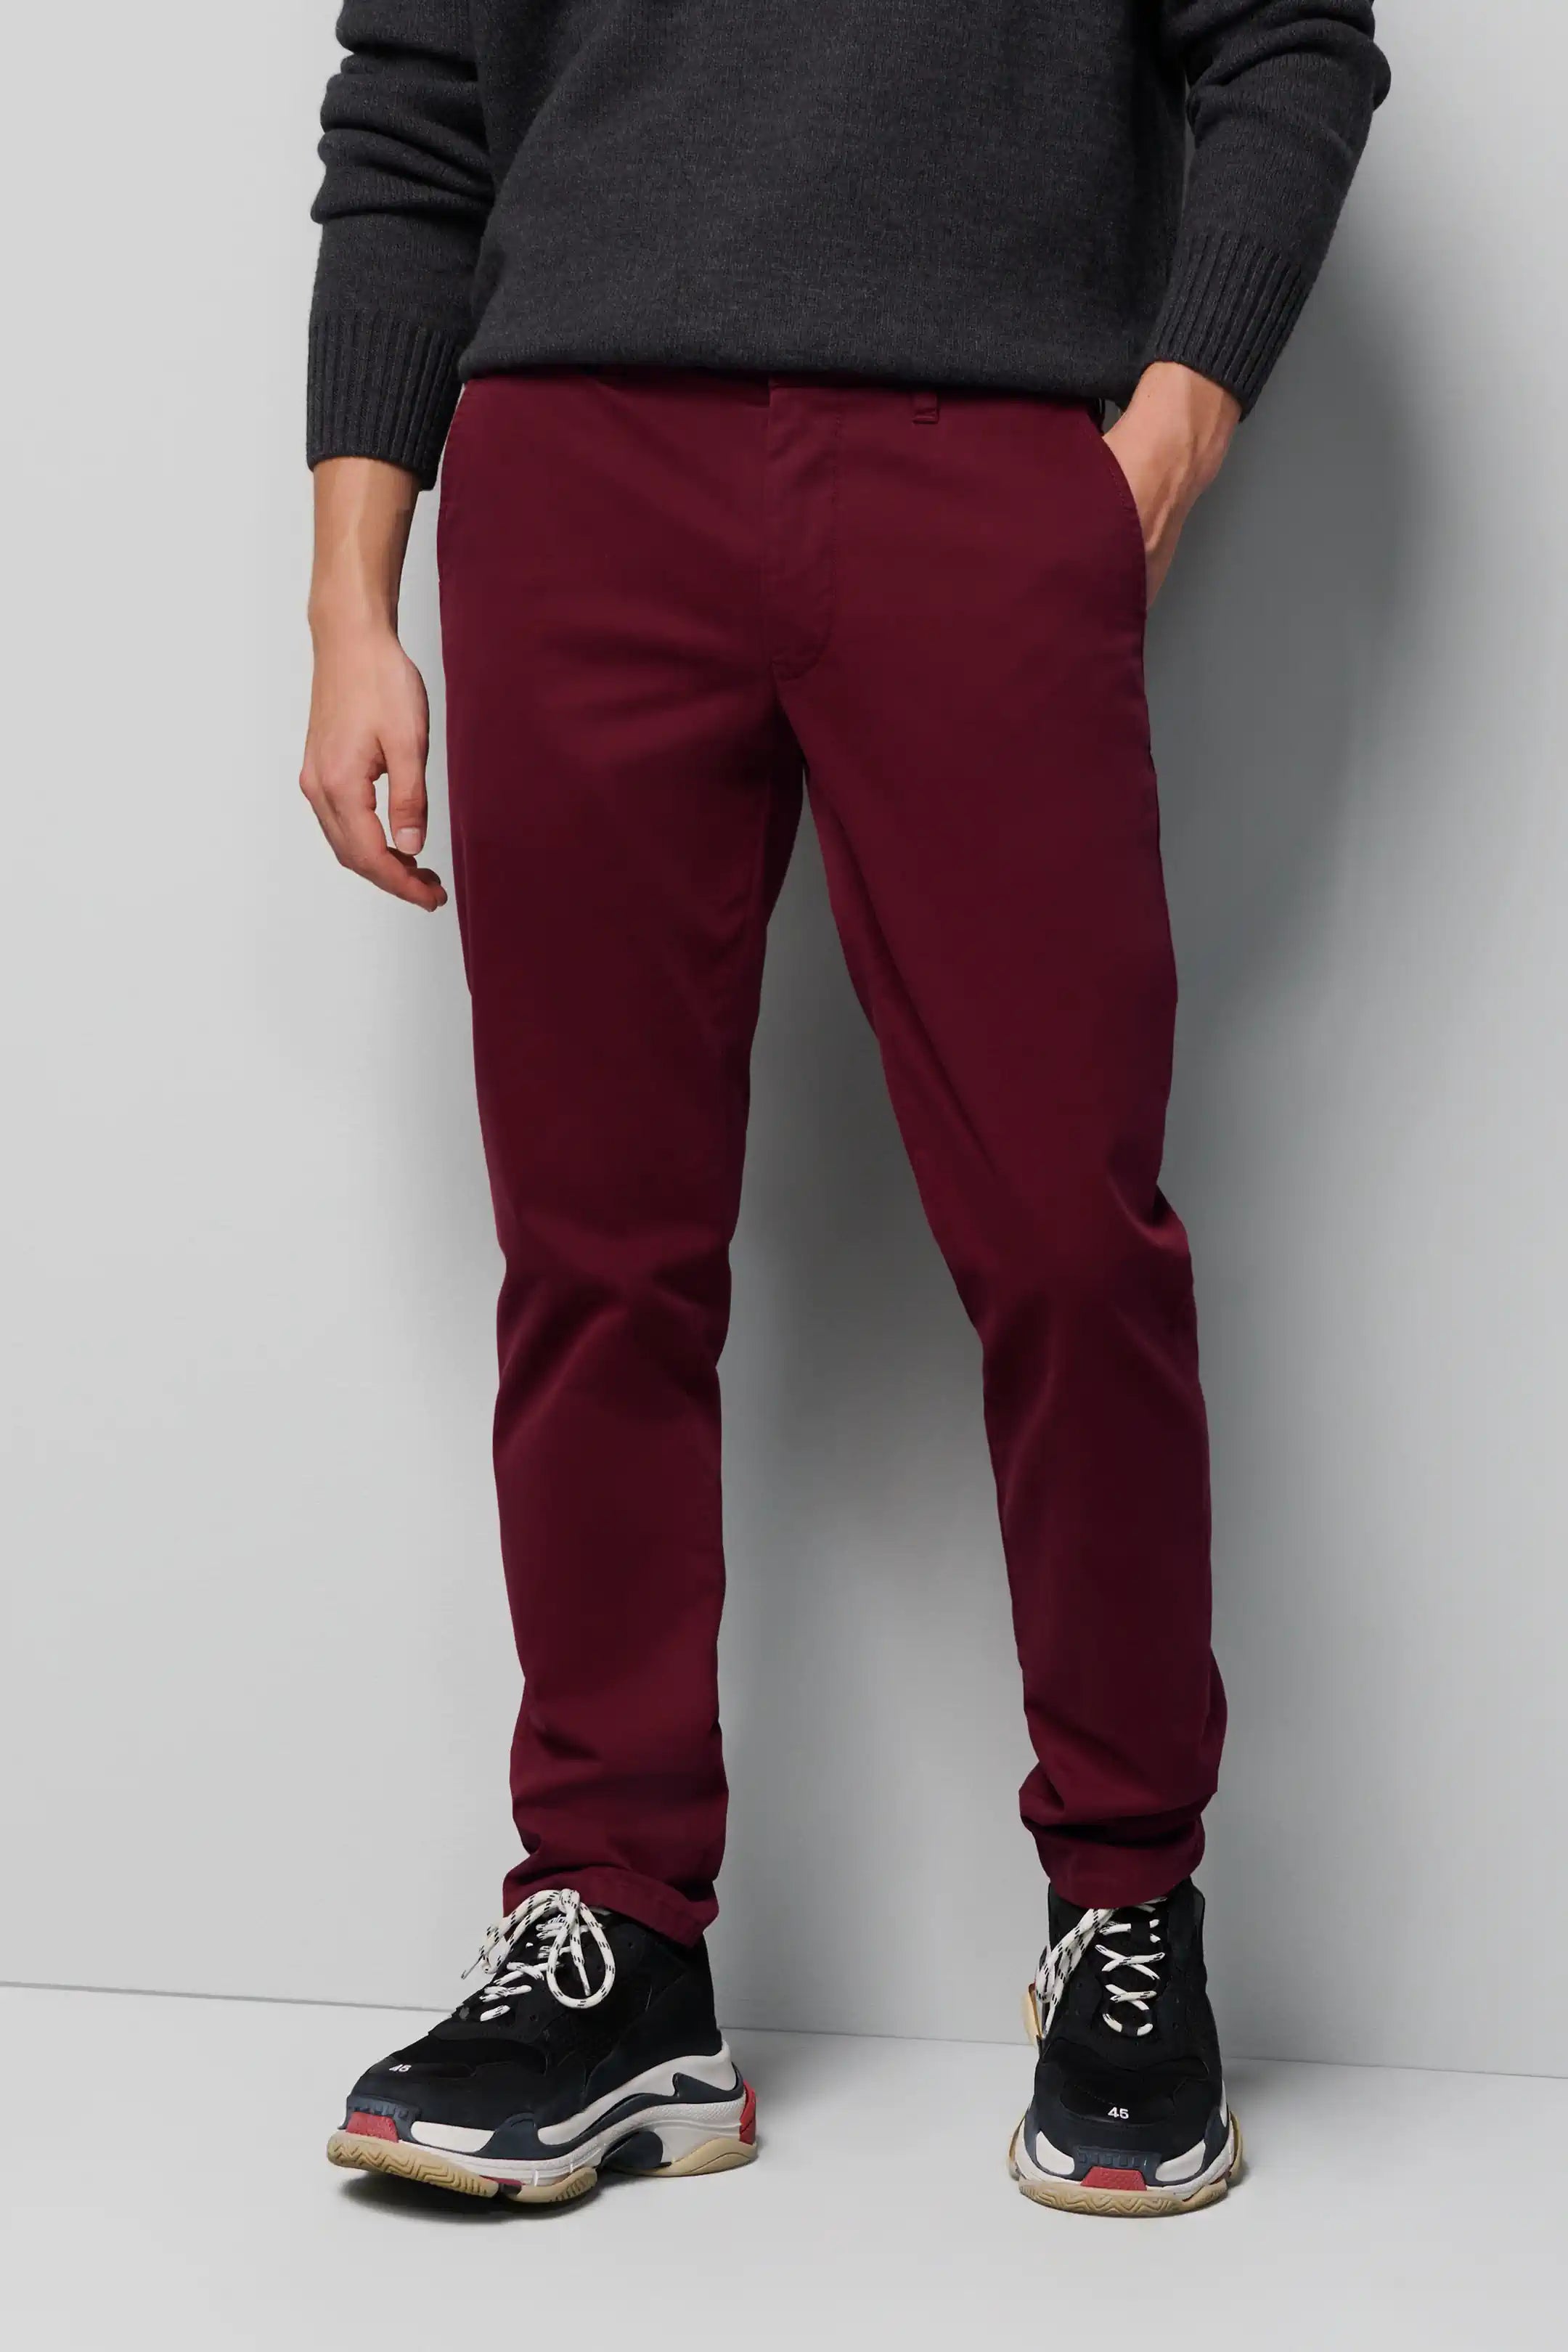 MEYER M5 Trousers - 6001 Soft Stretch Cotton Chinos - Bordeaux